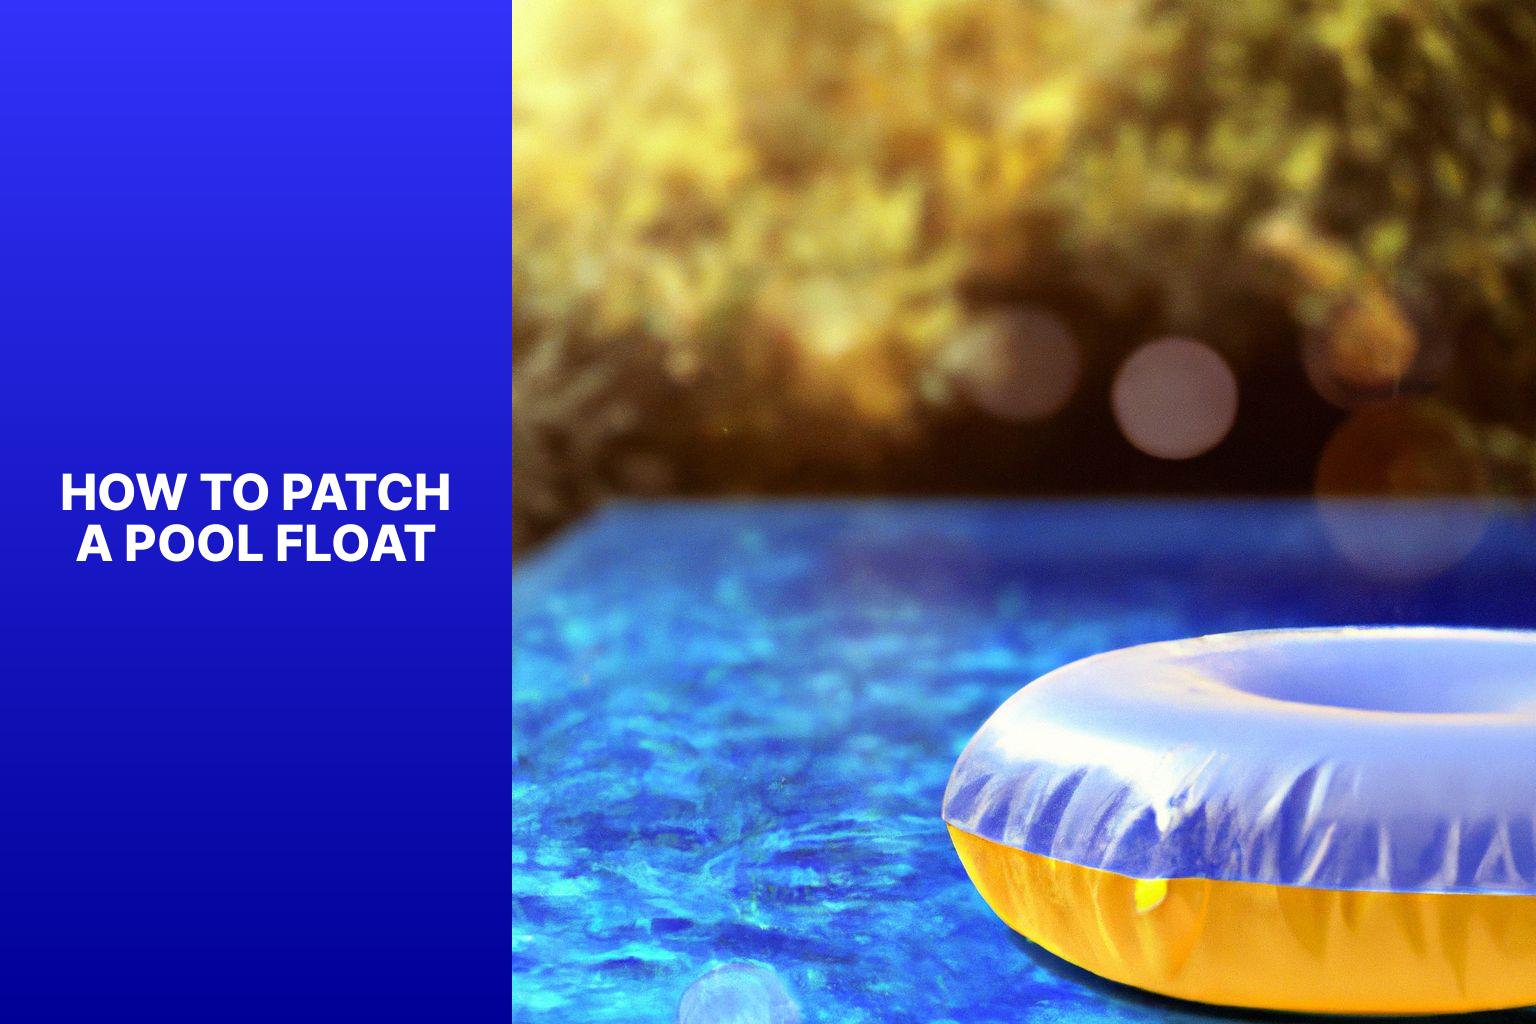 how to patch a pool float78j2 How to Patch a Pool Float?